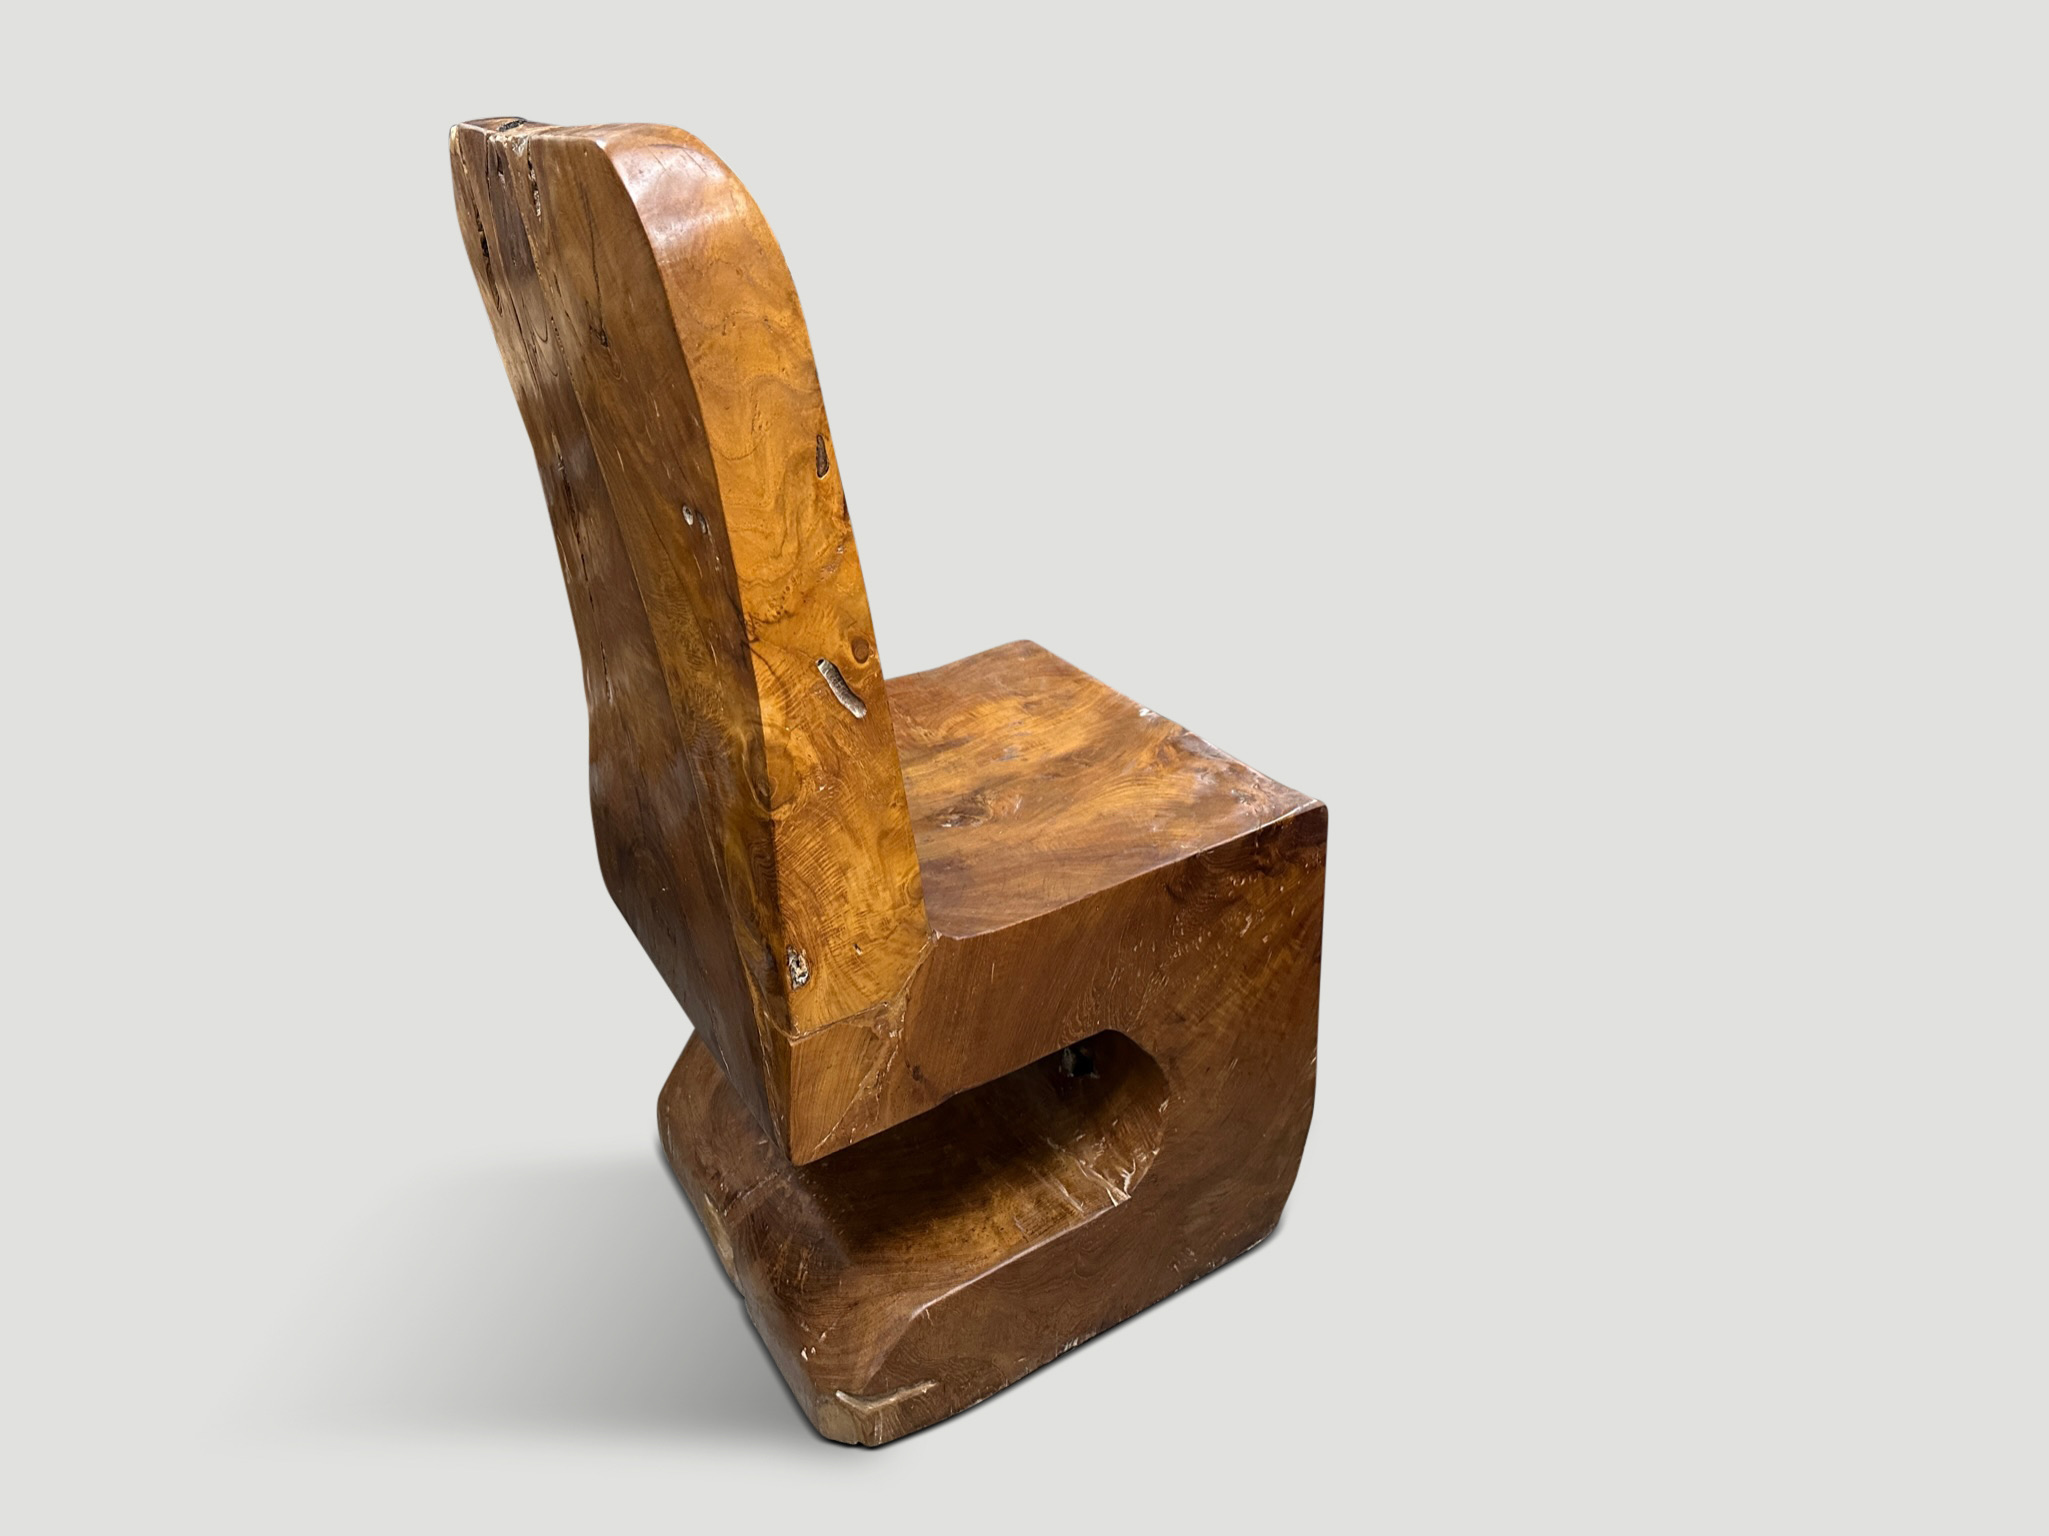 aged teak wood hand carved chair